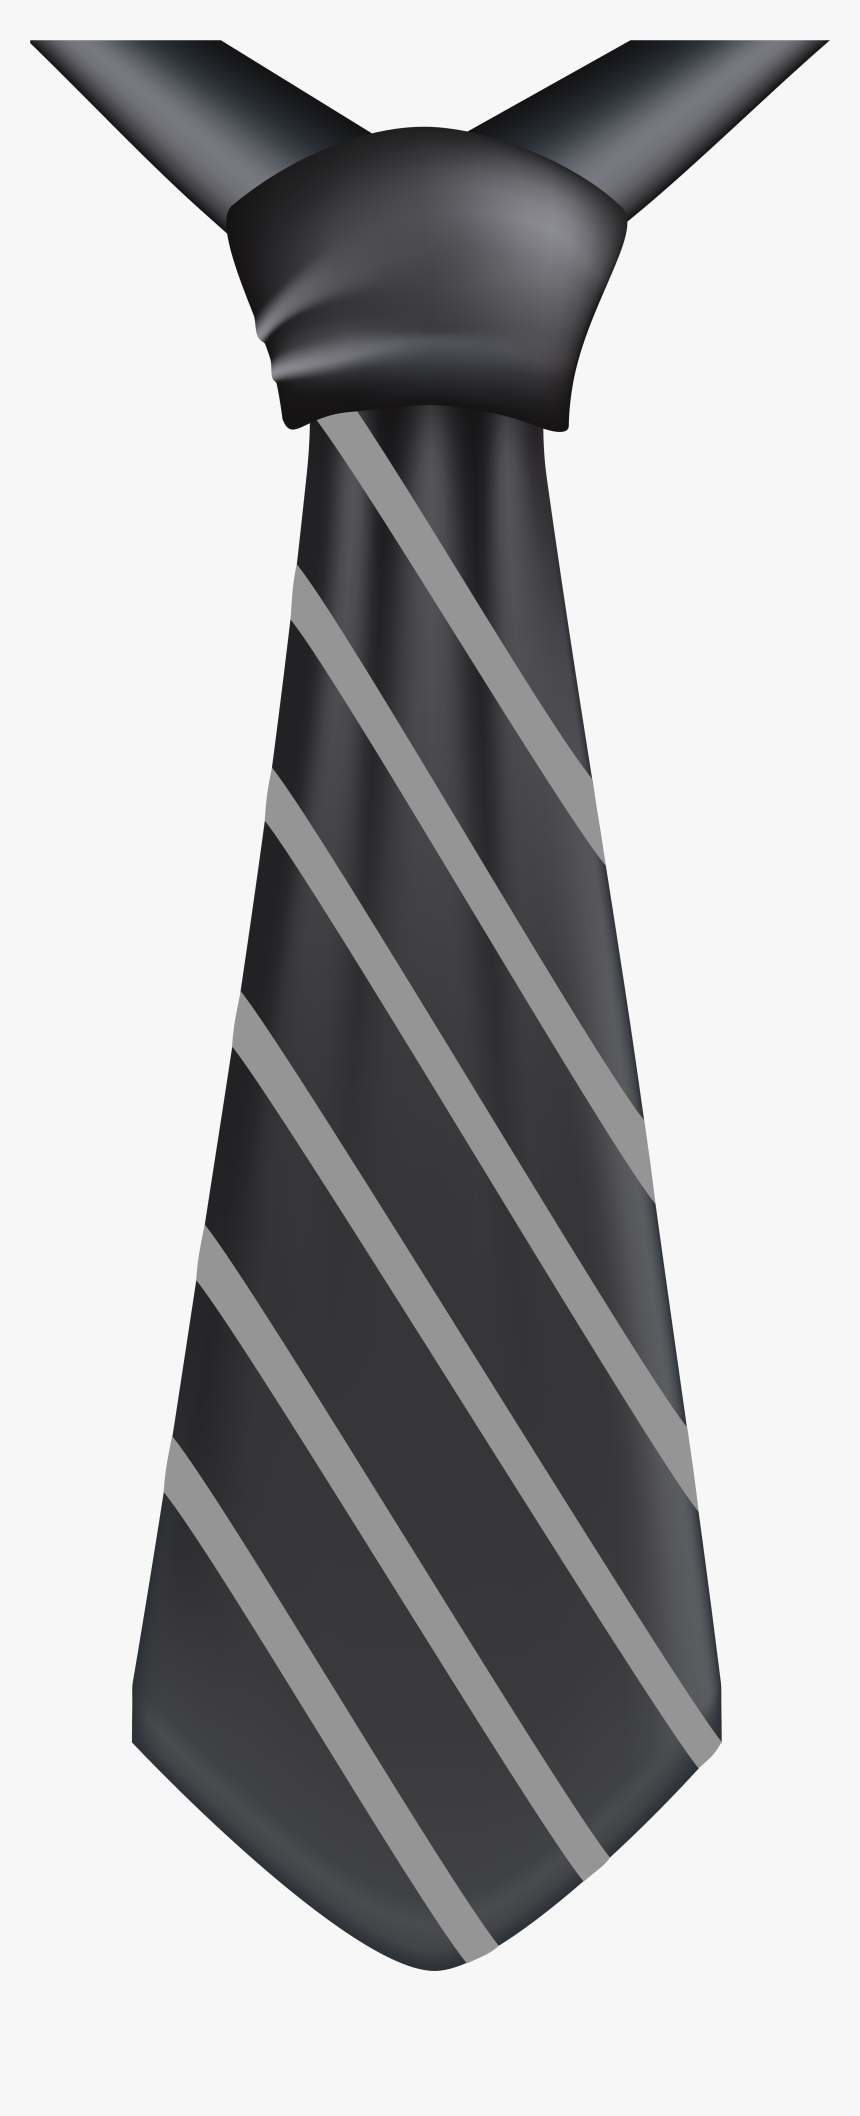 Transparent Background Tie Clipart, HD Png Download, Free Download